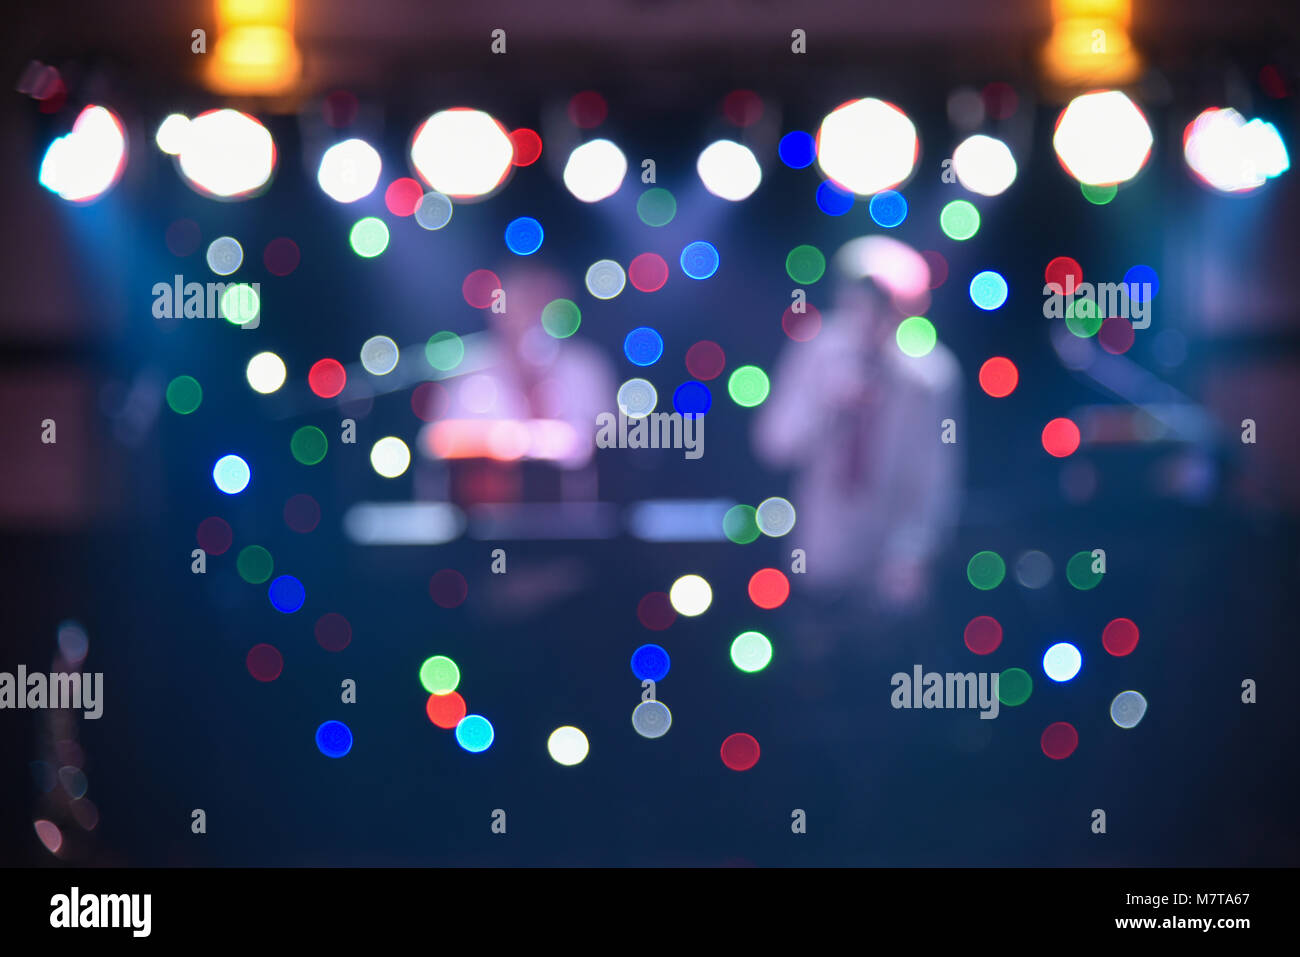 Blurry colorful background, light at a dance party, designer background for text overlay Stock Photo